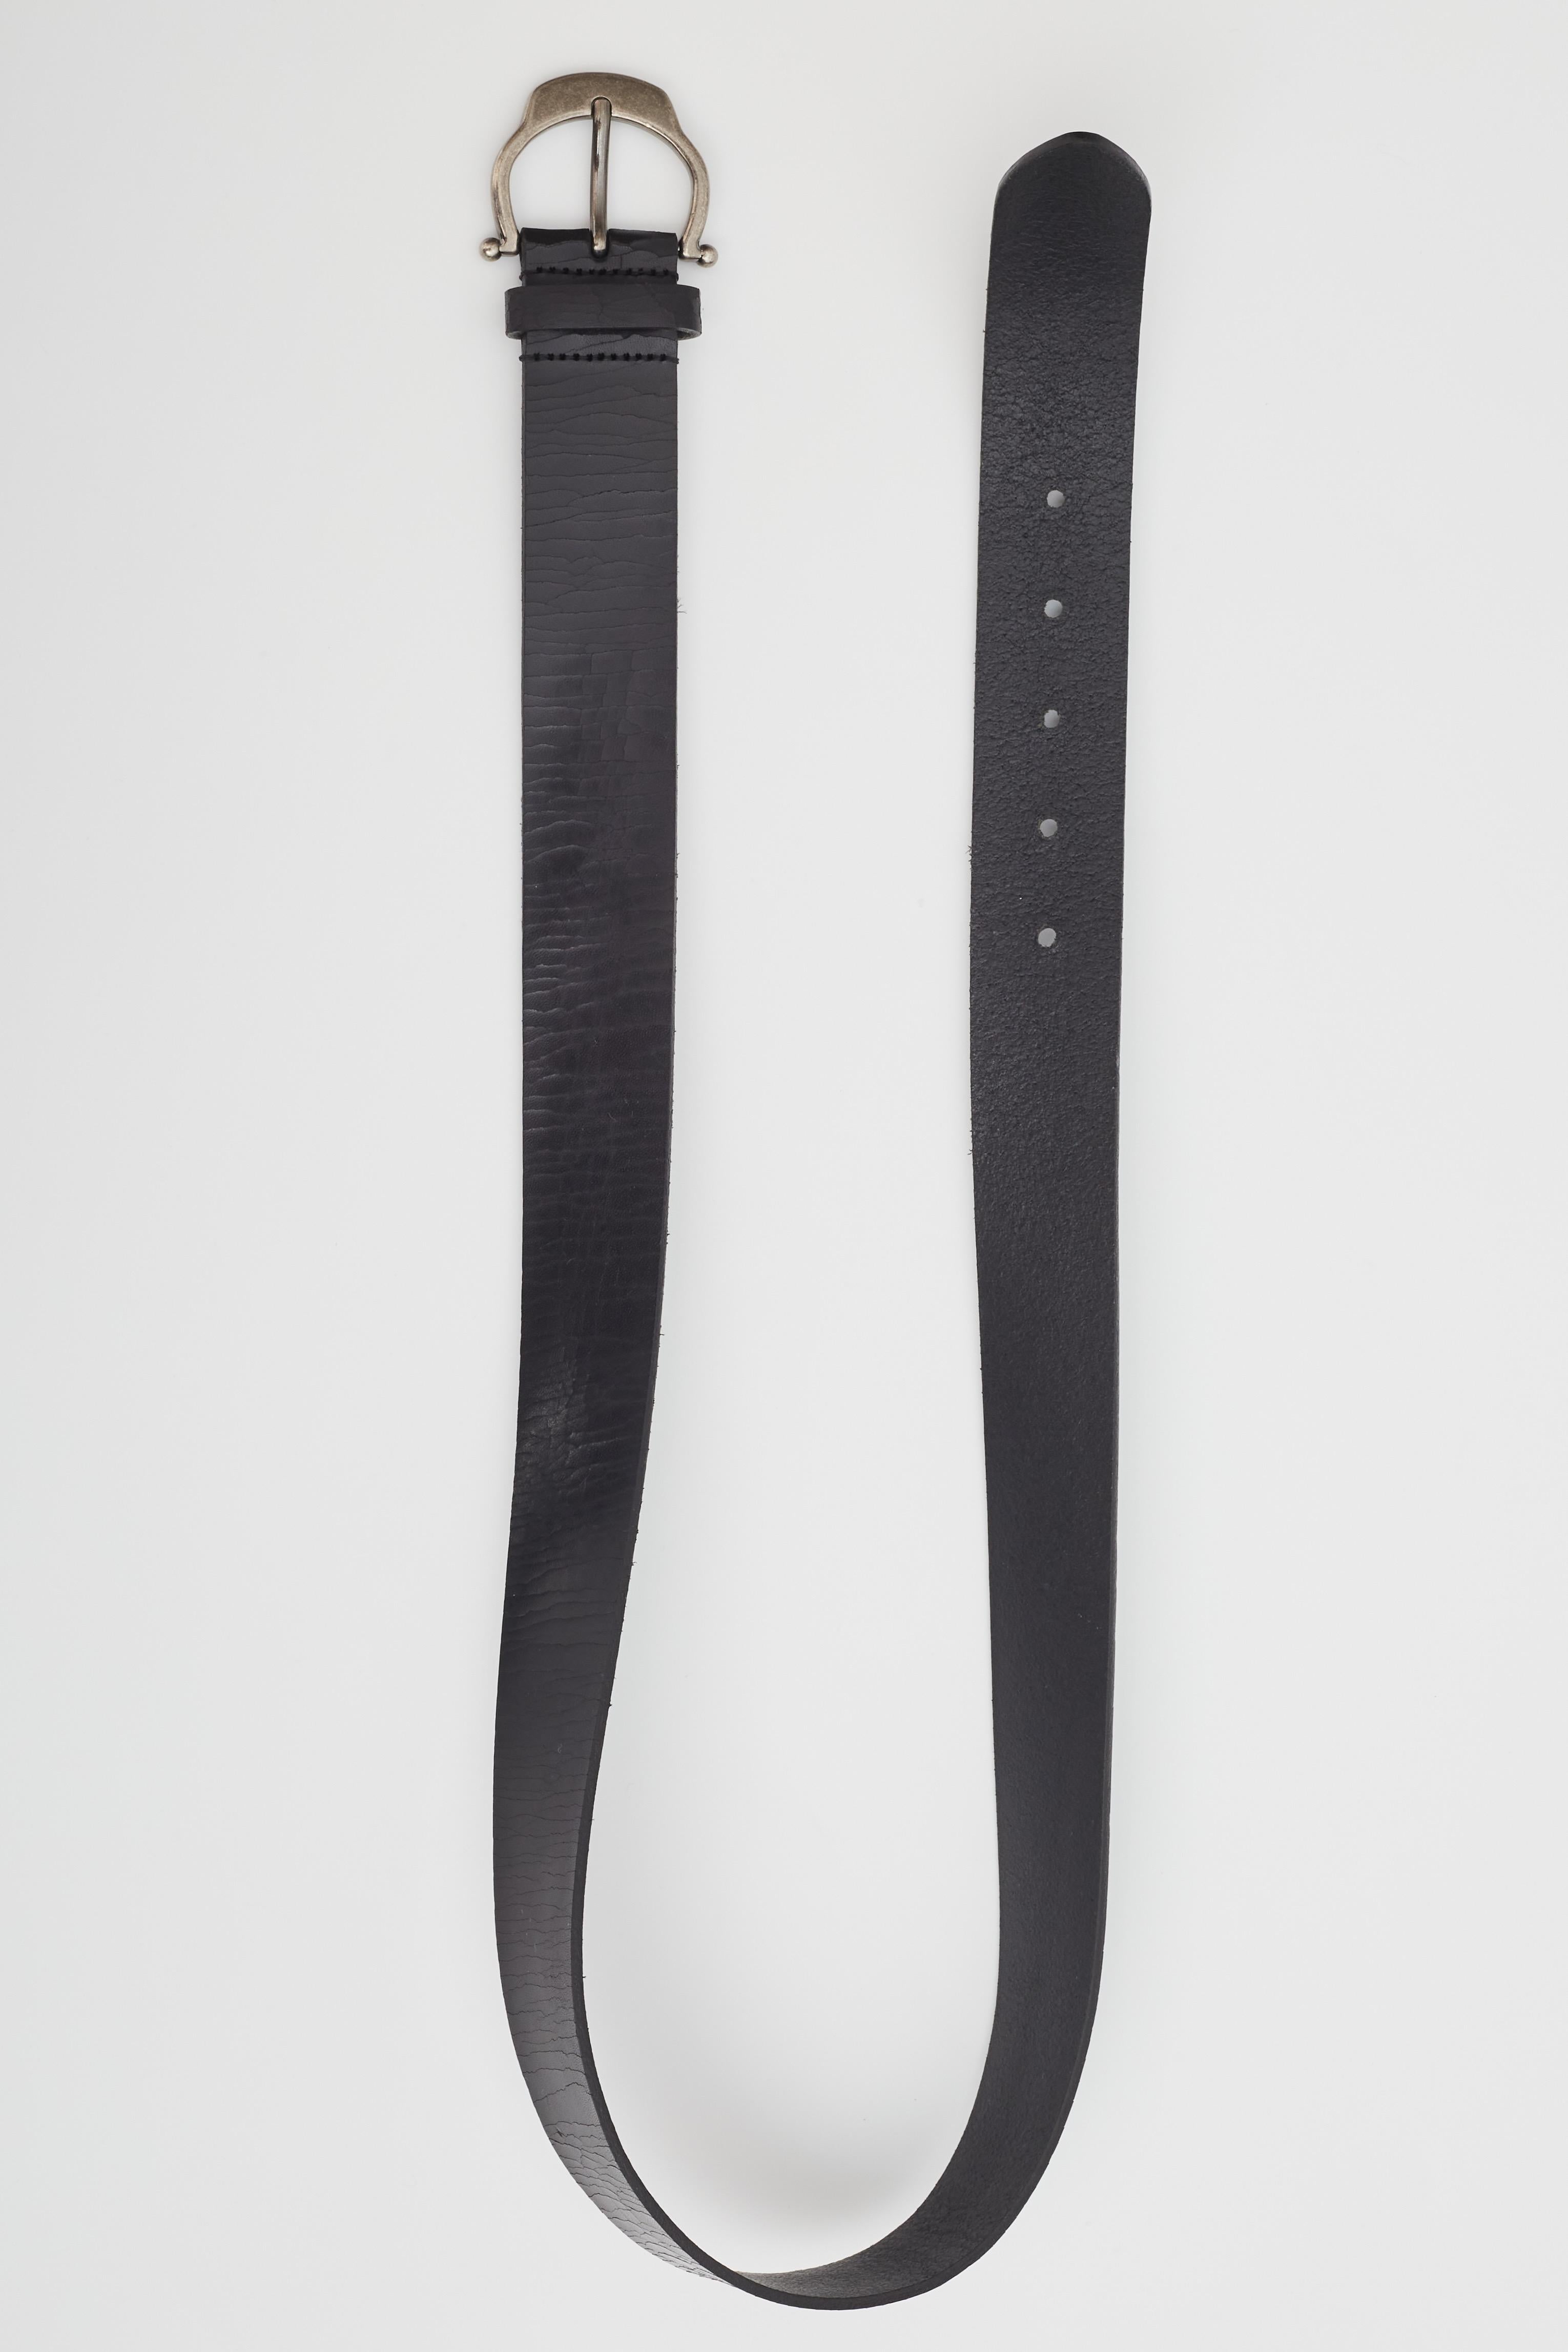 Saint Laurent Black Cracked Leather Belt (90/36) In Excellent Condition For Sale In Montreal, Quebec